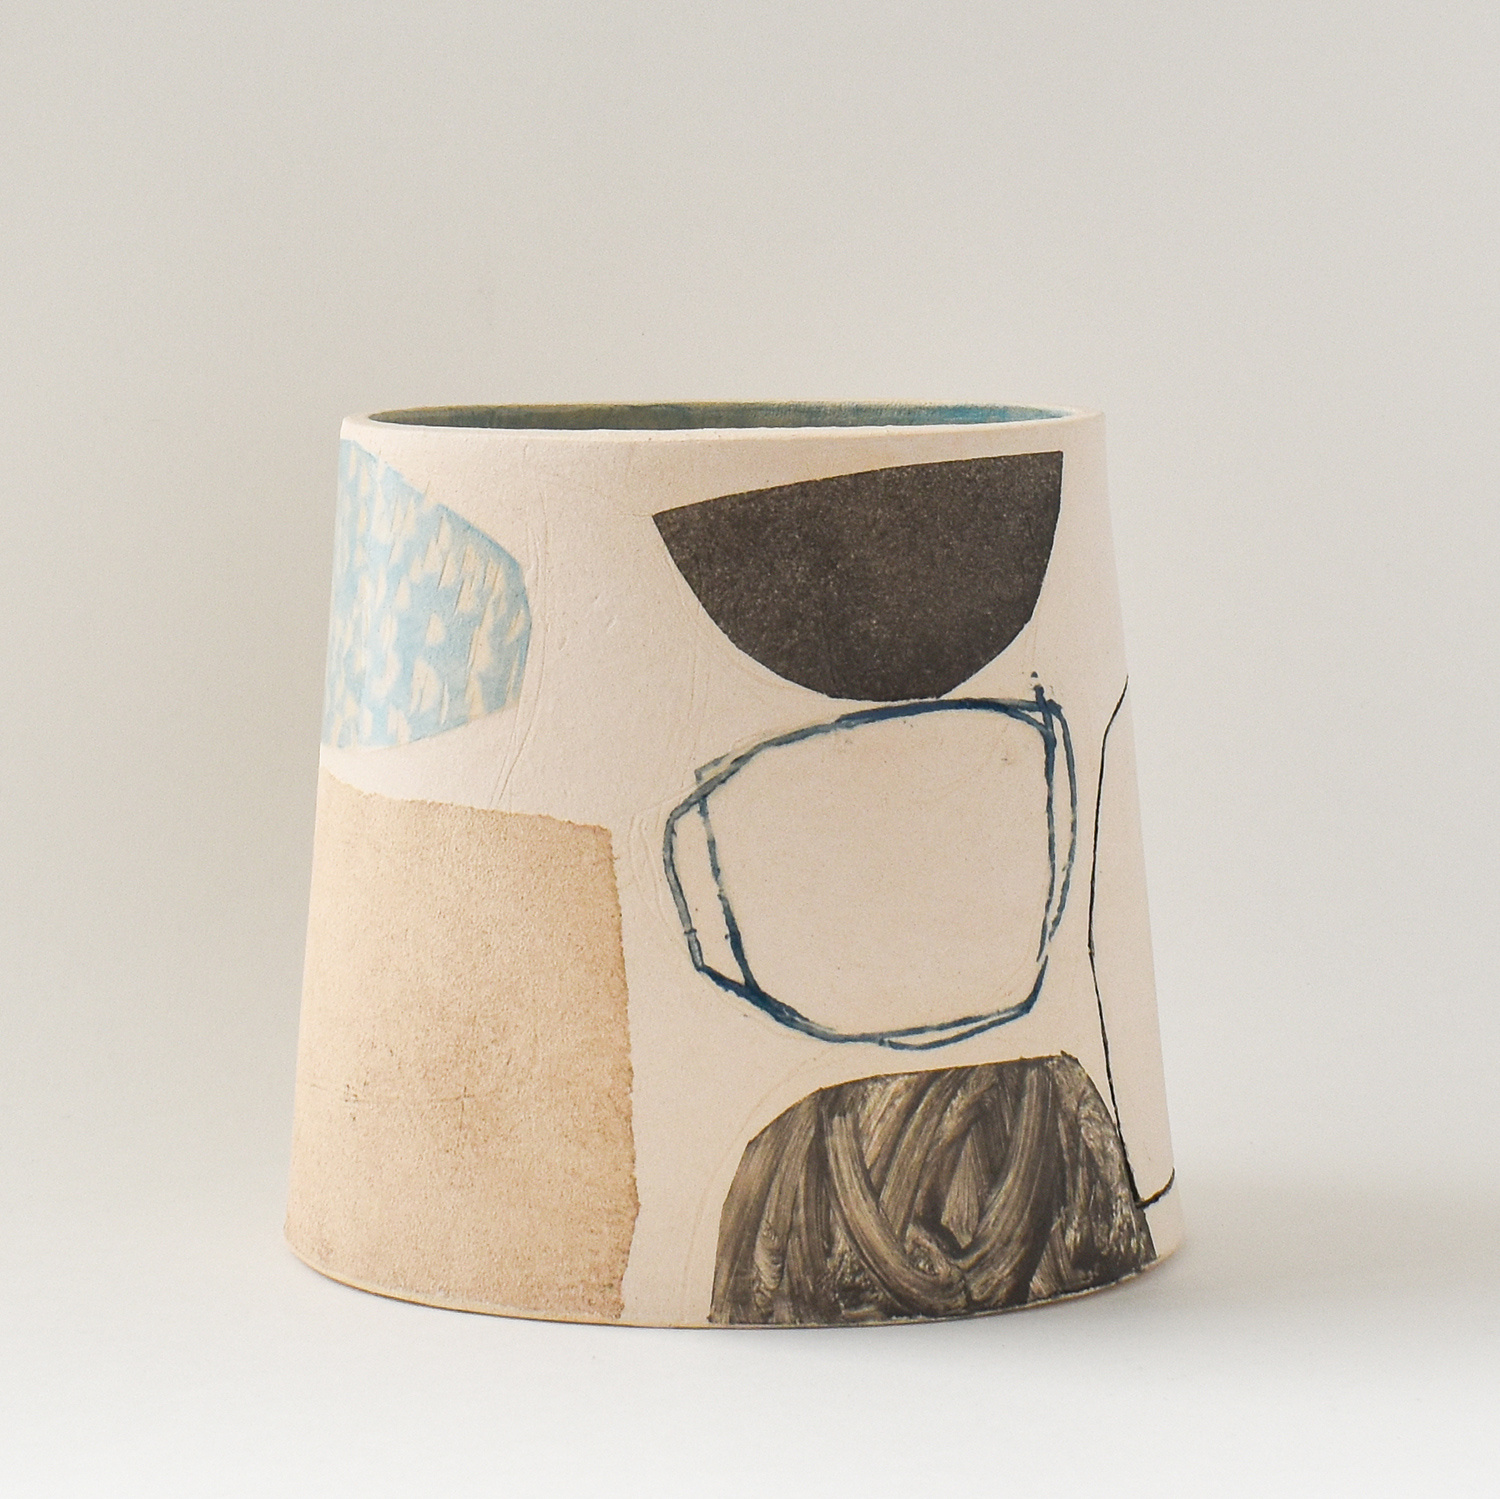 Tapered Oval Vessel by Louise McNiff